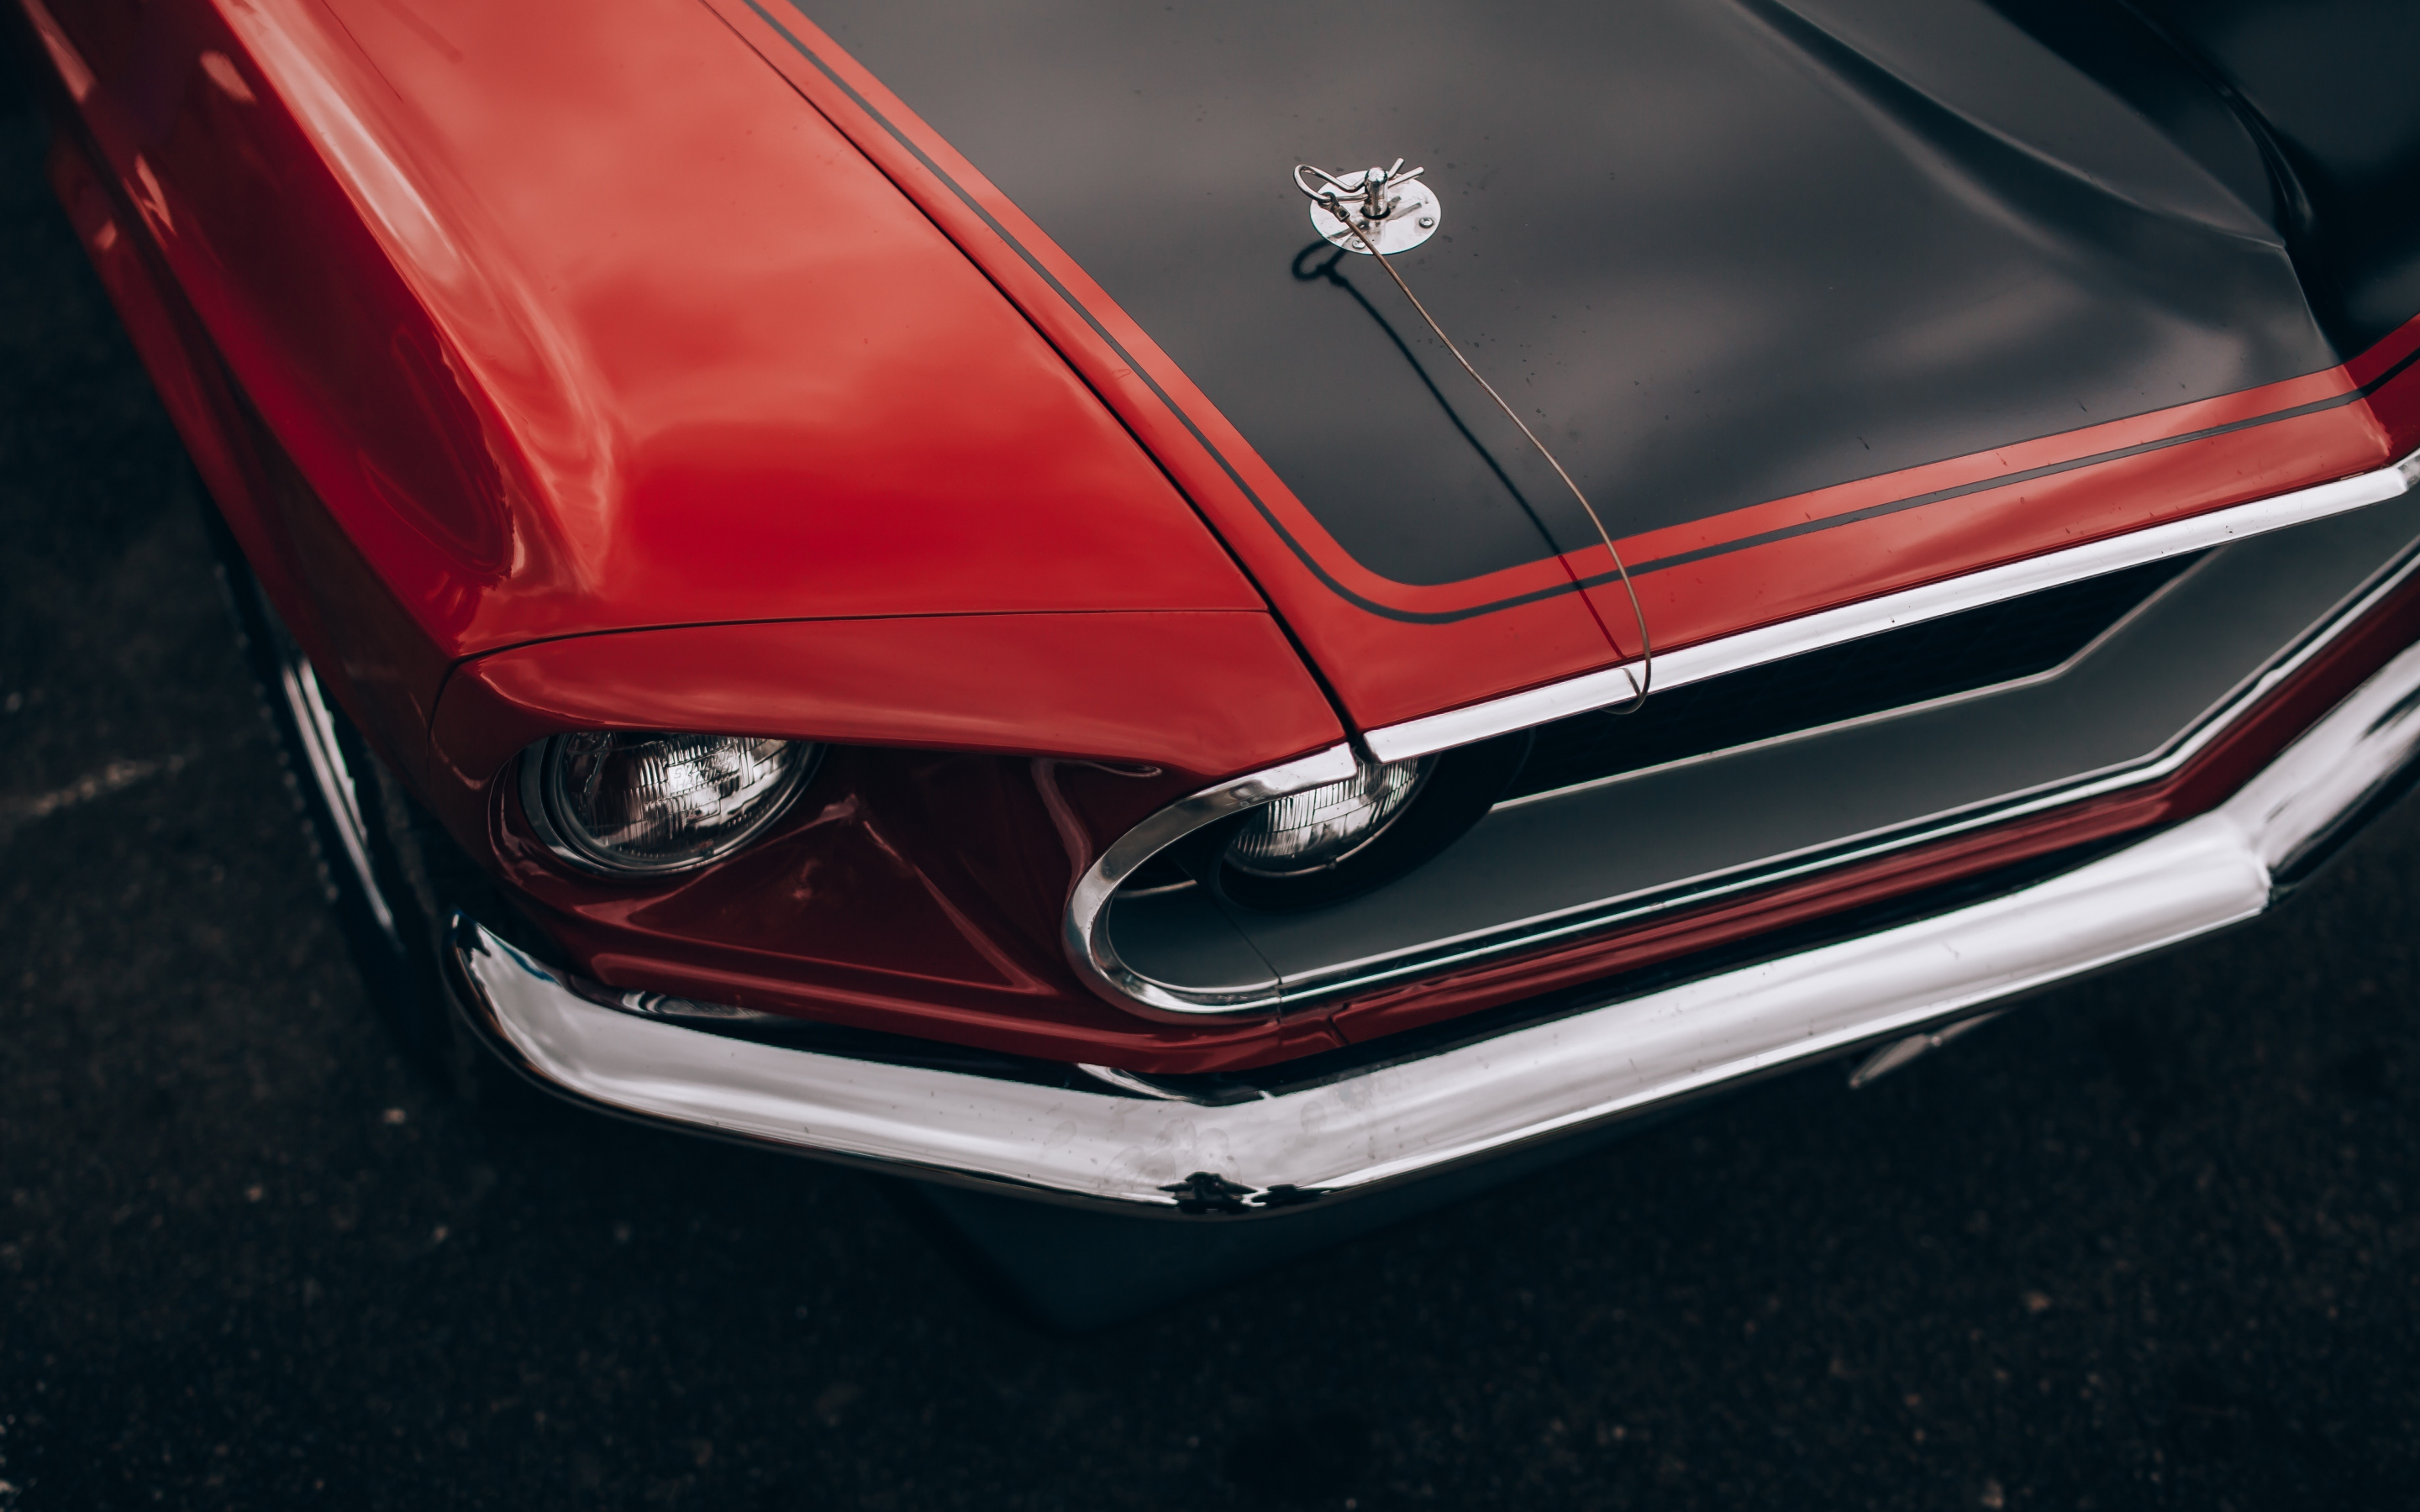 Headlight, car, red and classic, 2880x1800 wallpaper